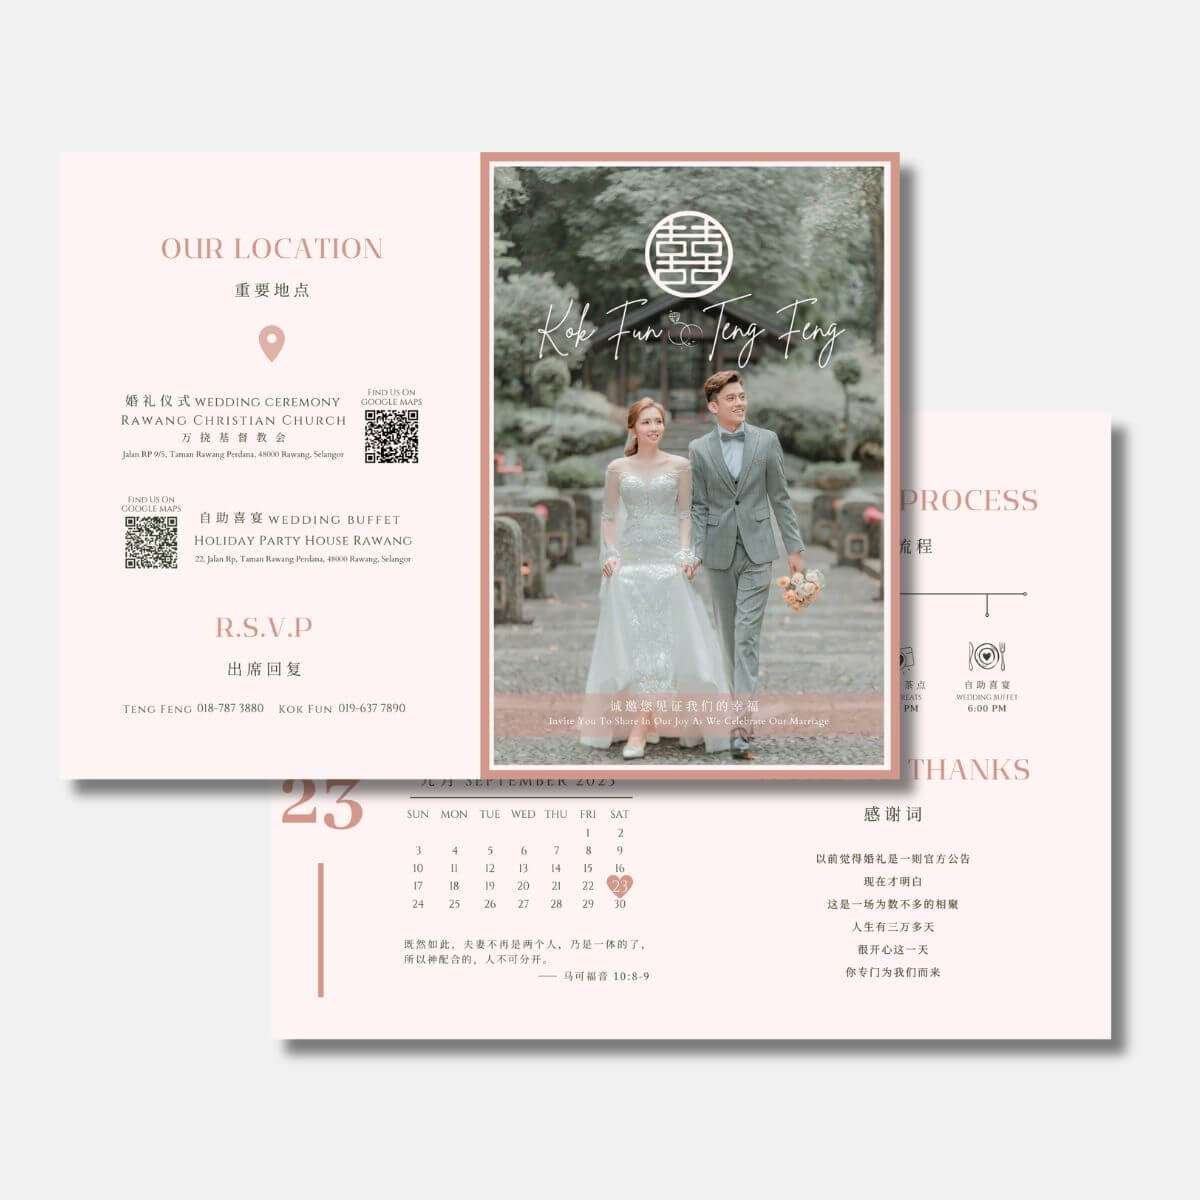 A display of the "Combo Folded" wedding invitation set, illustrating a double-sided, fold-over design with a romantic couple's portrait on the front and essential details like venue location with QR code, schedule, and elegant script on a cream backdrop inside.